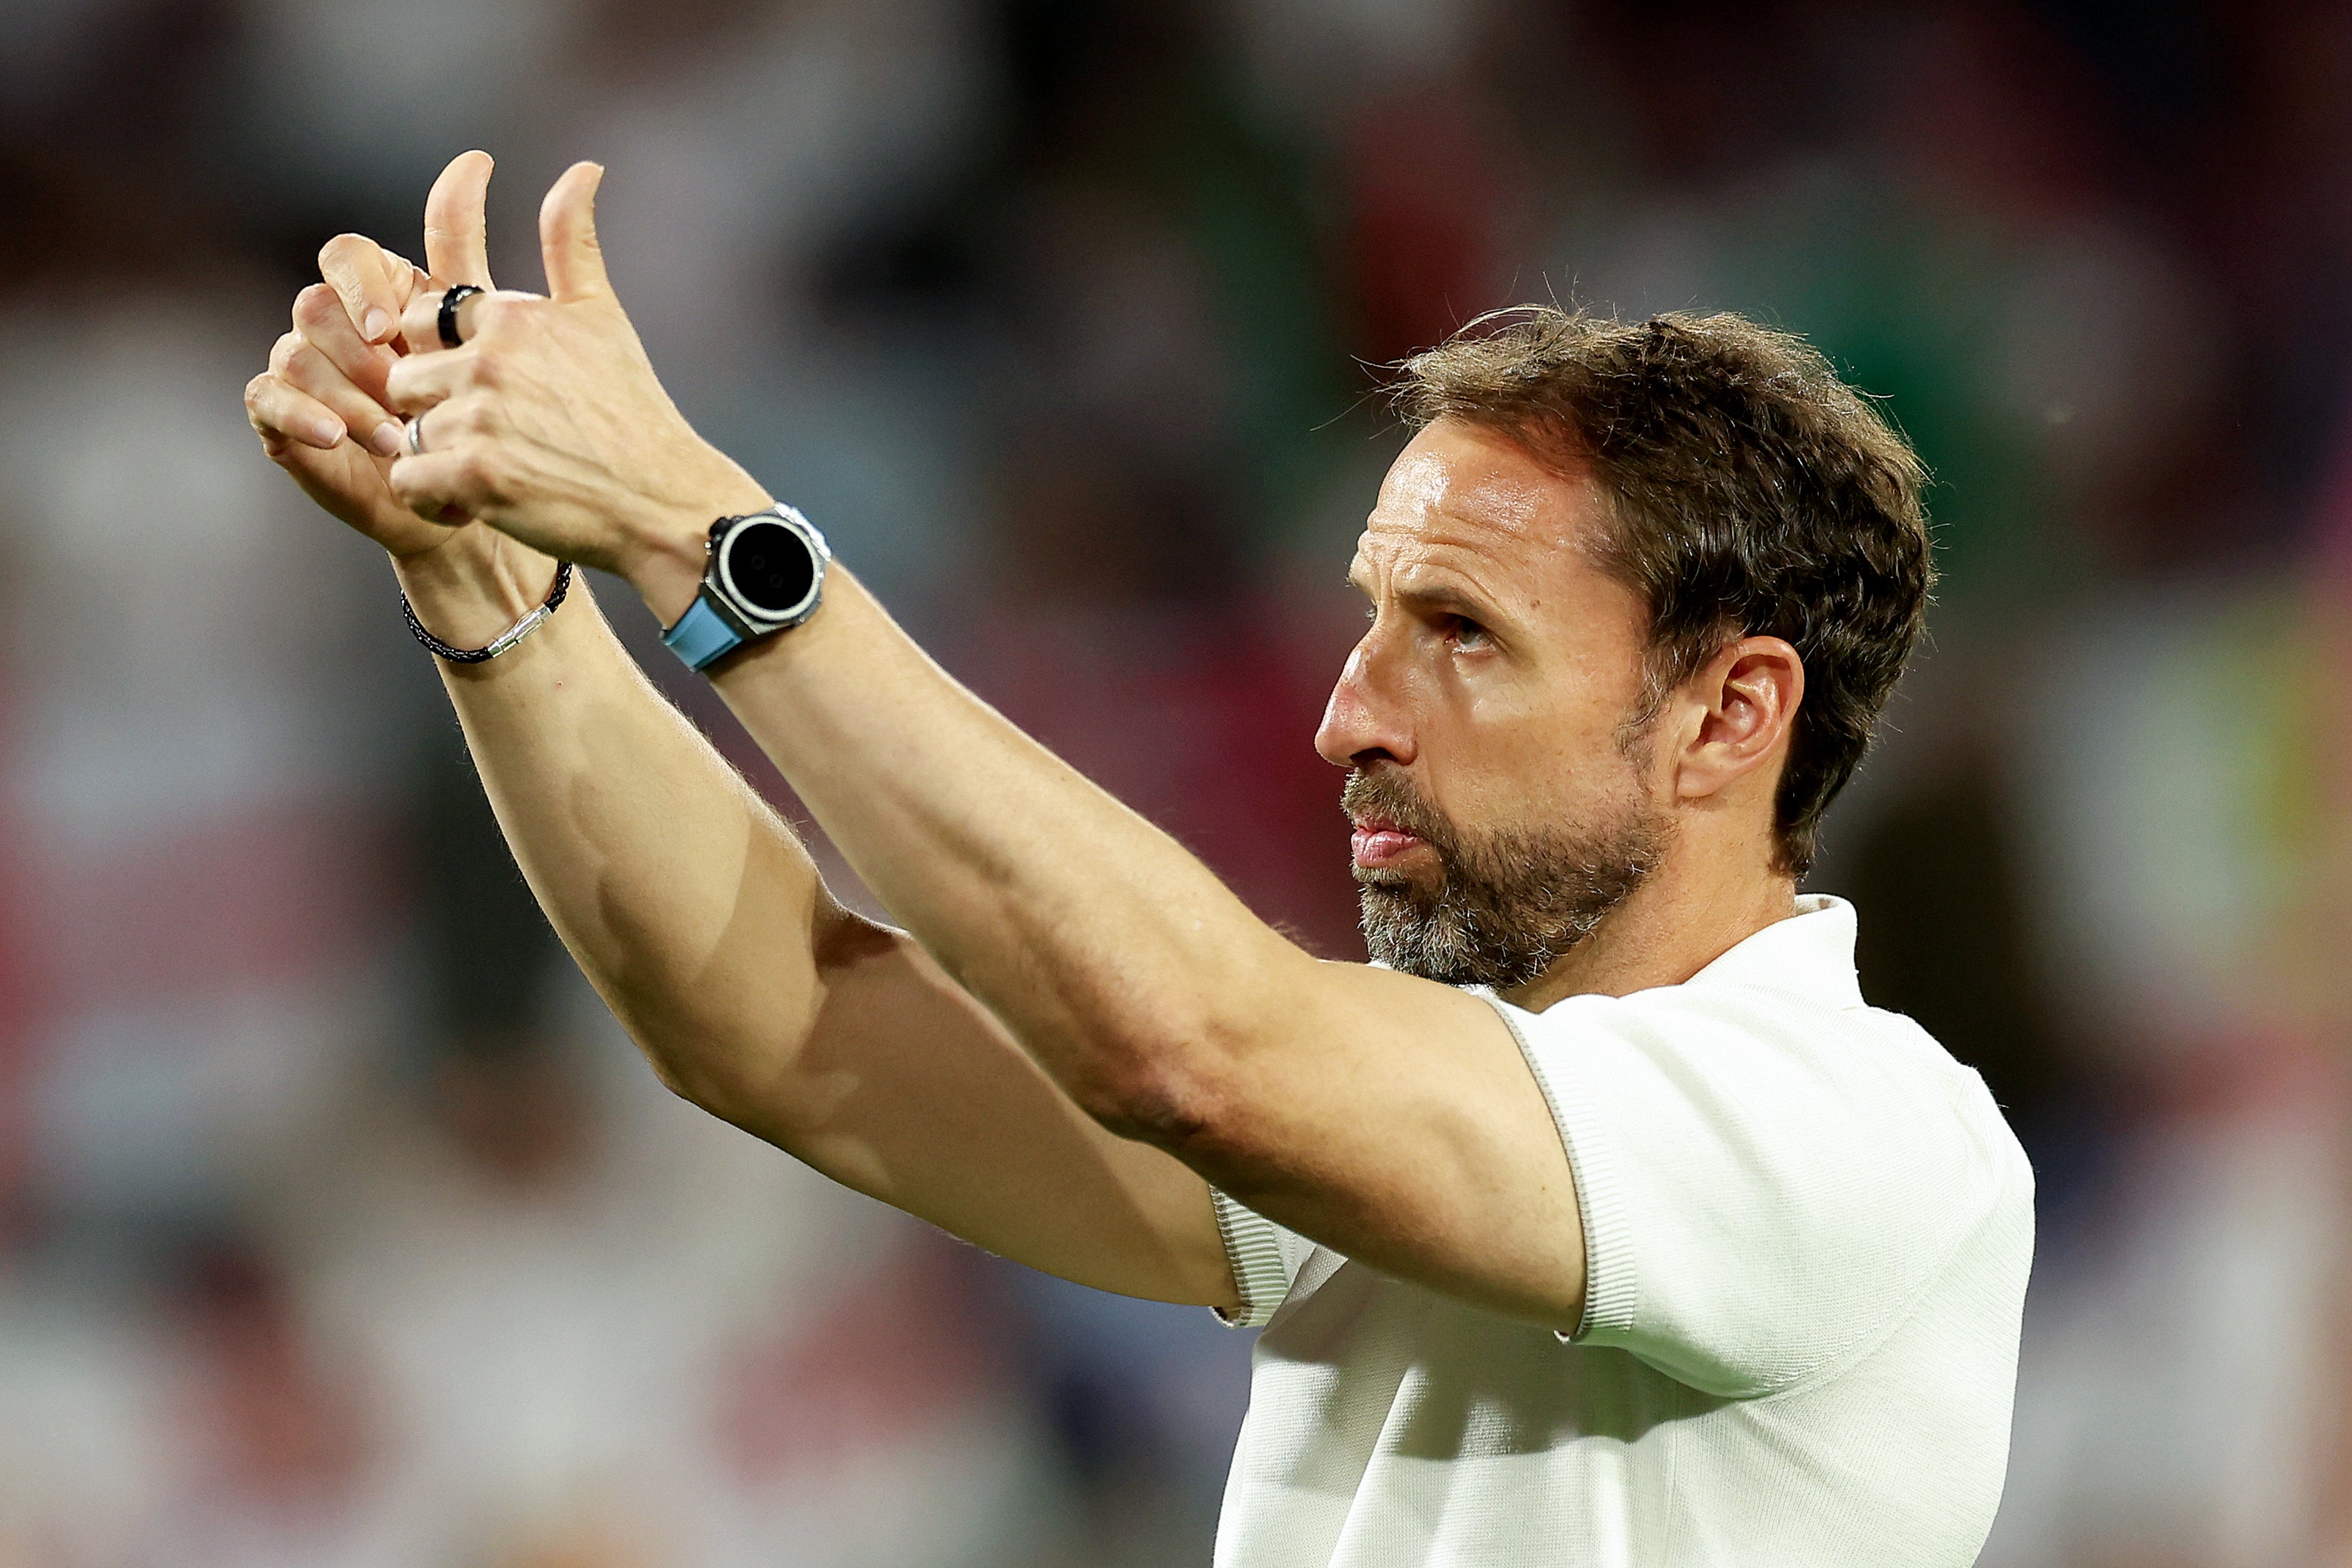 Gareth Southgate has indicated that he will continue to go and acknowledge England fans after each game